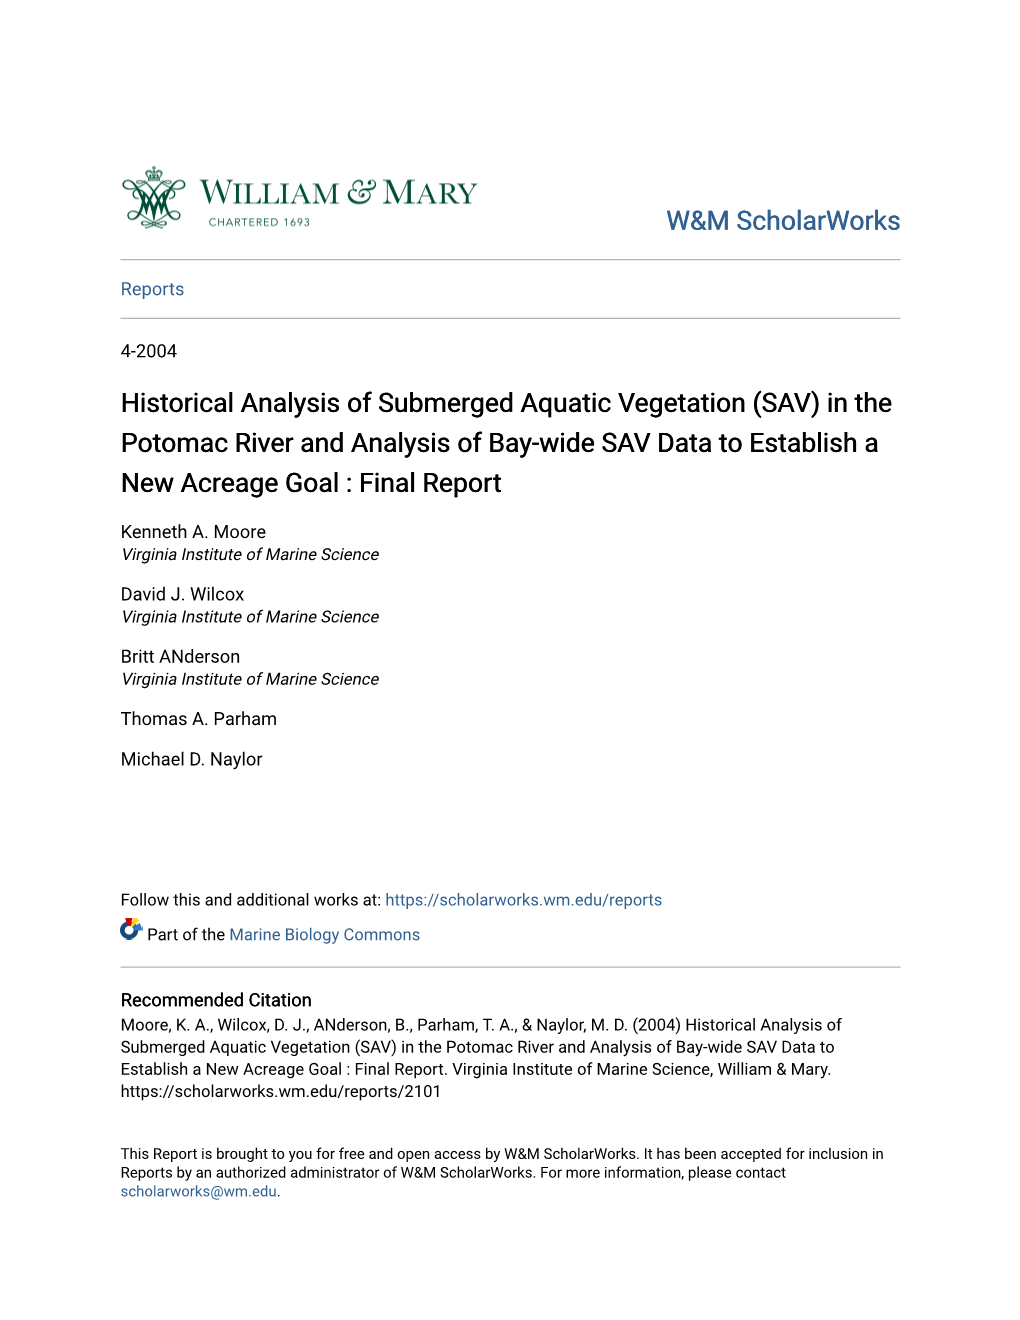 Historical Analysis of Submerged Aquatic Vegetation (SAV) in the Potomac River and Analysis of Bay-Wide SAV Data to Establish a New Acreage Goal : Final Report